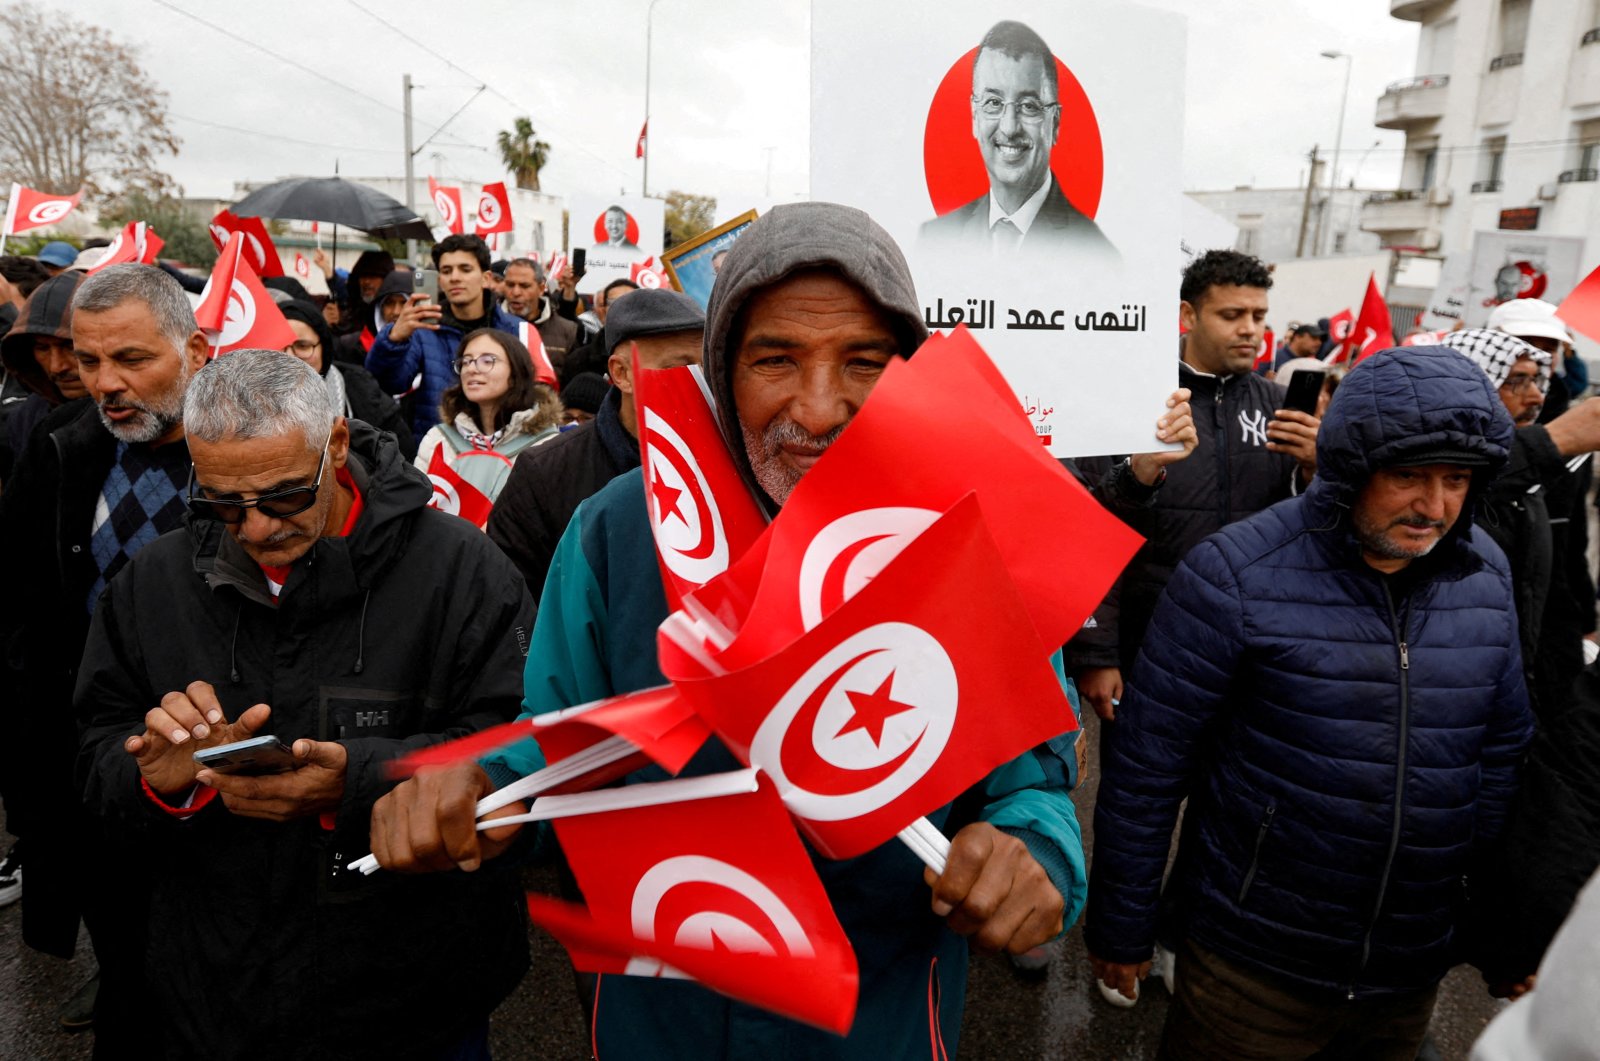 A man holds Tunisian national flags during a protest against Tunisian President Kais Saied&#039;s seizure of governing powers, in Tunis, Tunisia March 20, 2022. (Reuters Photo)